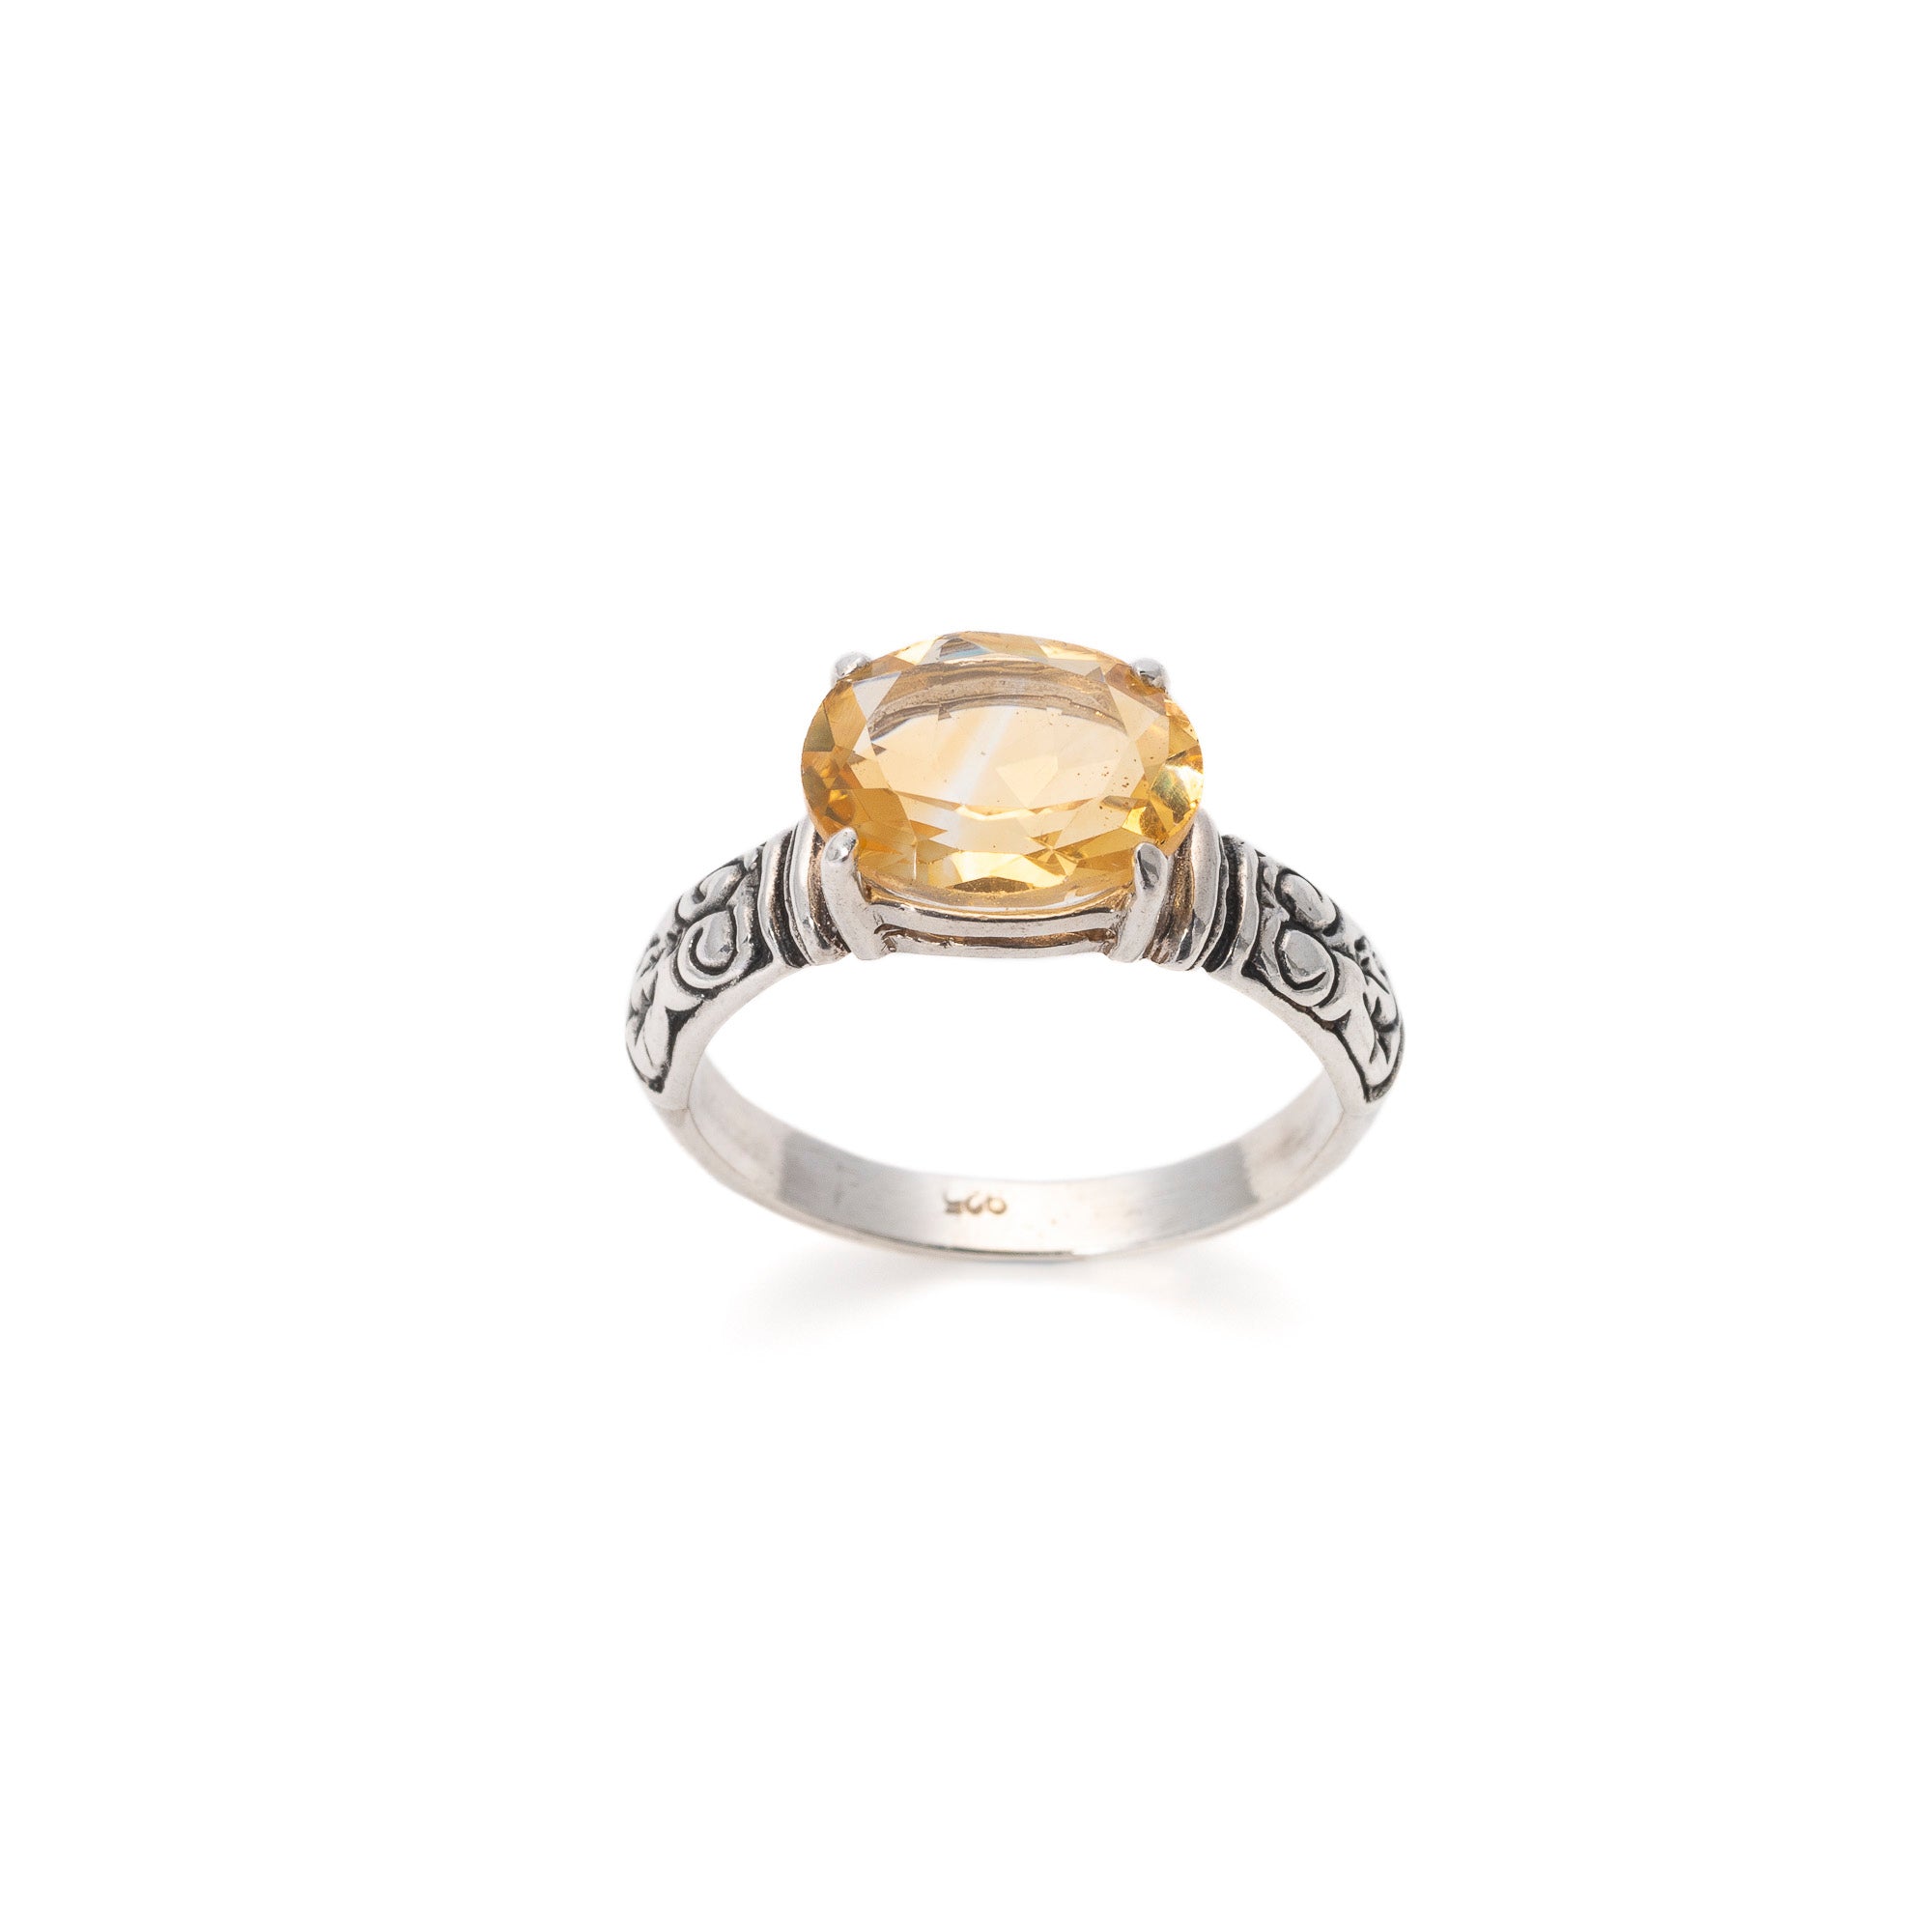 Horizontal Citrine Ring in a Vintage Style